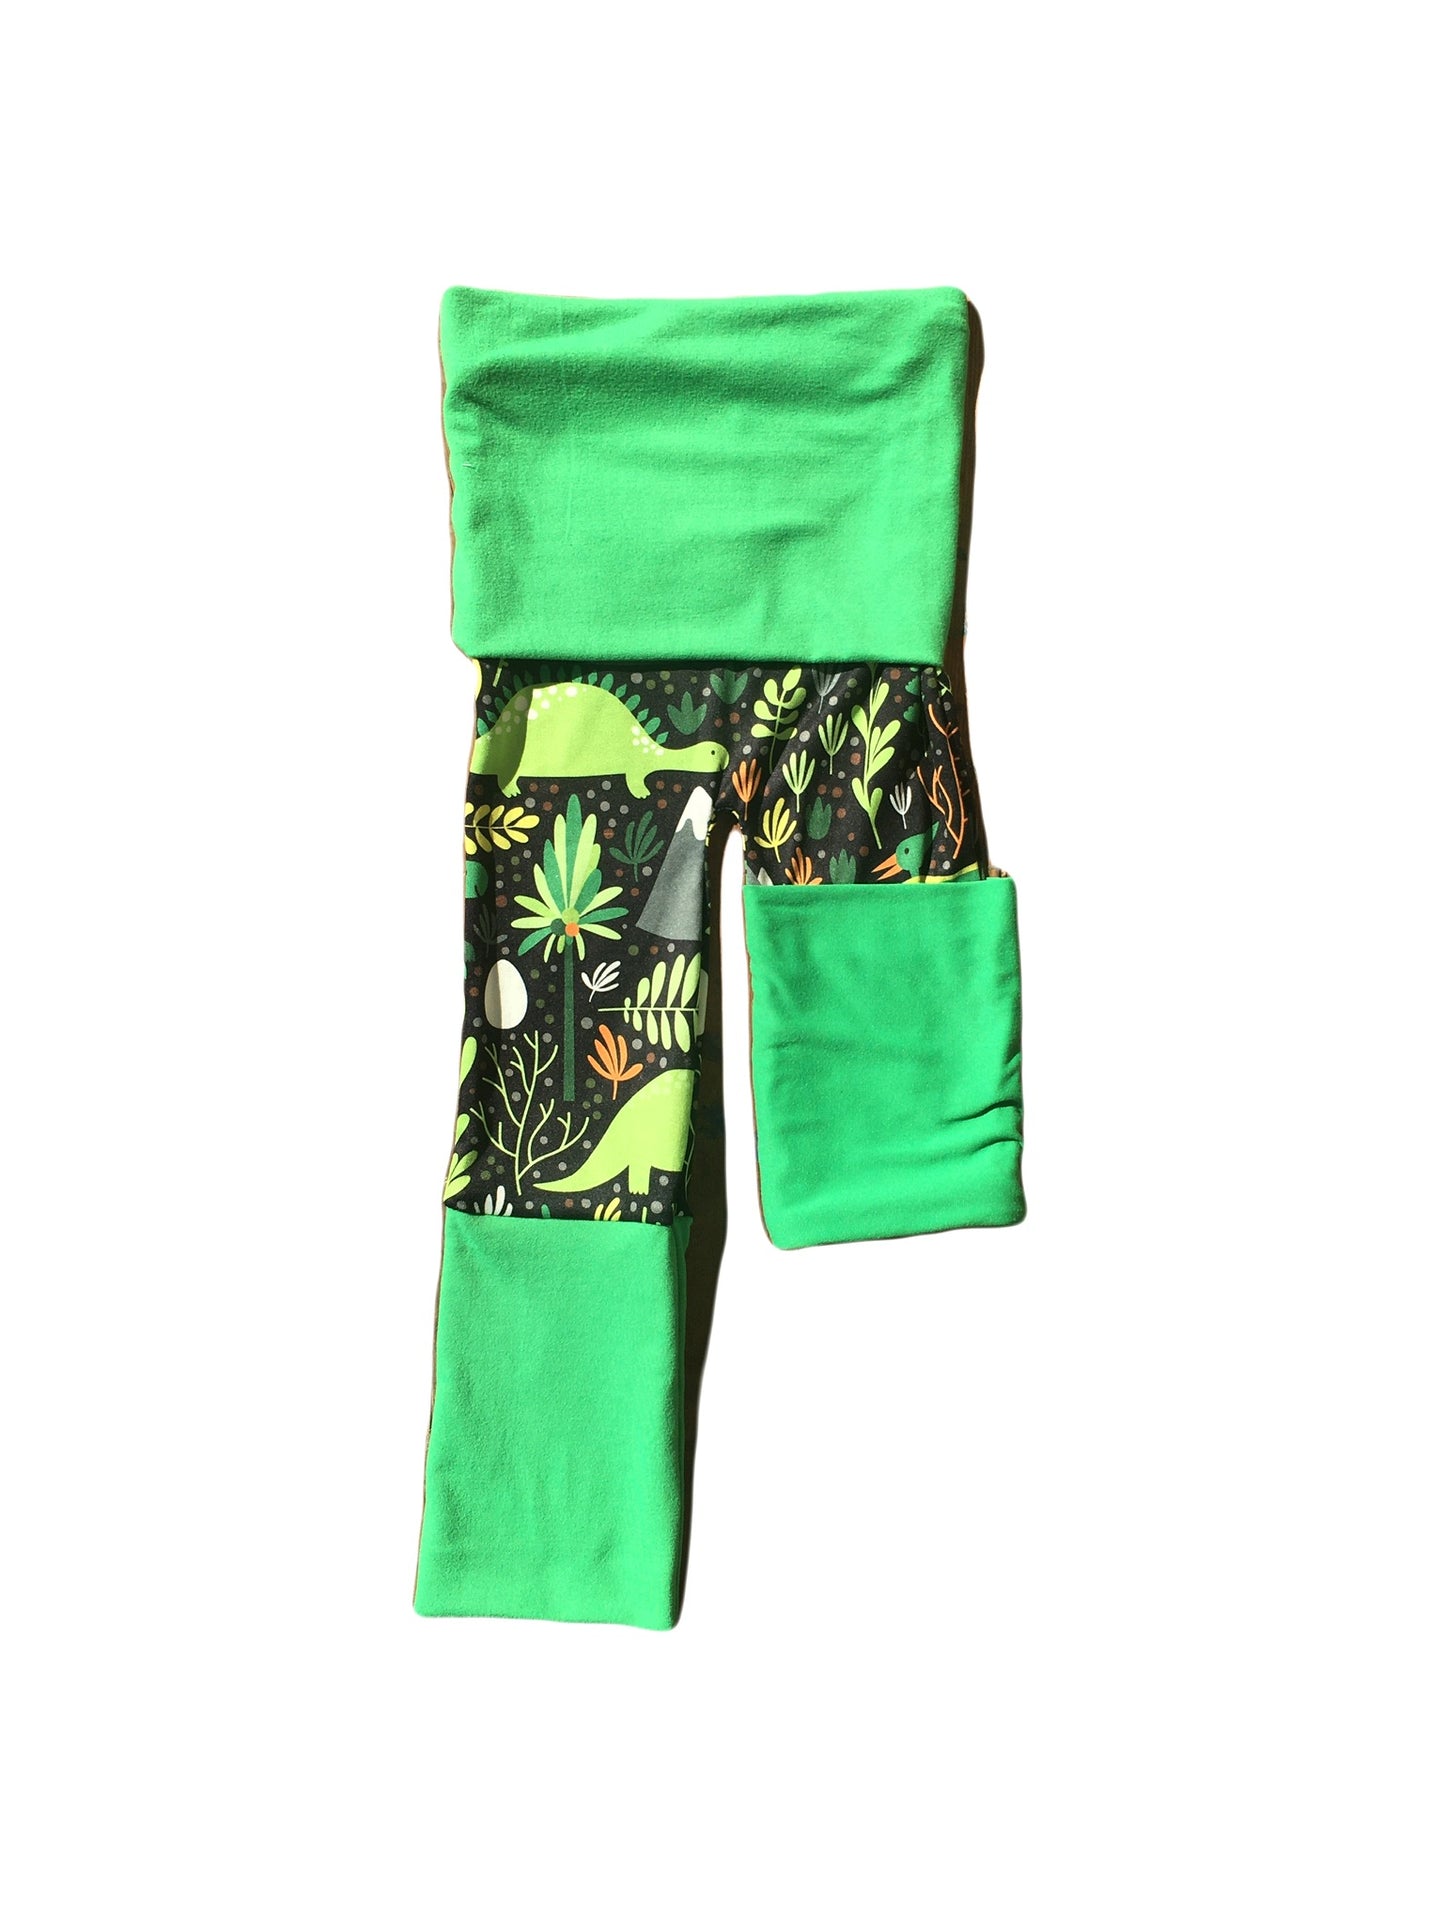 Adjustable Pants - Dinosaurs with Green